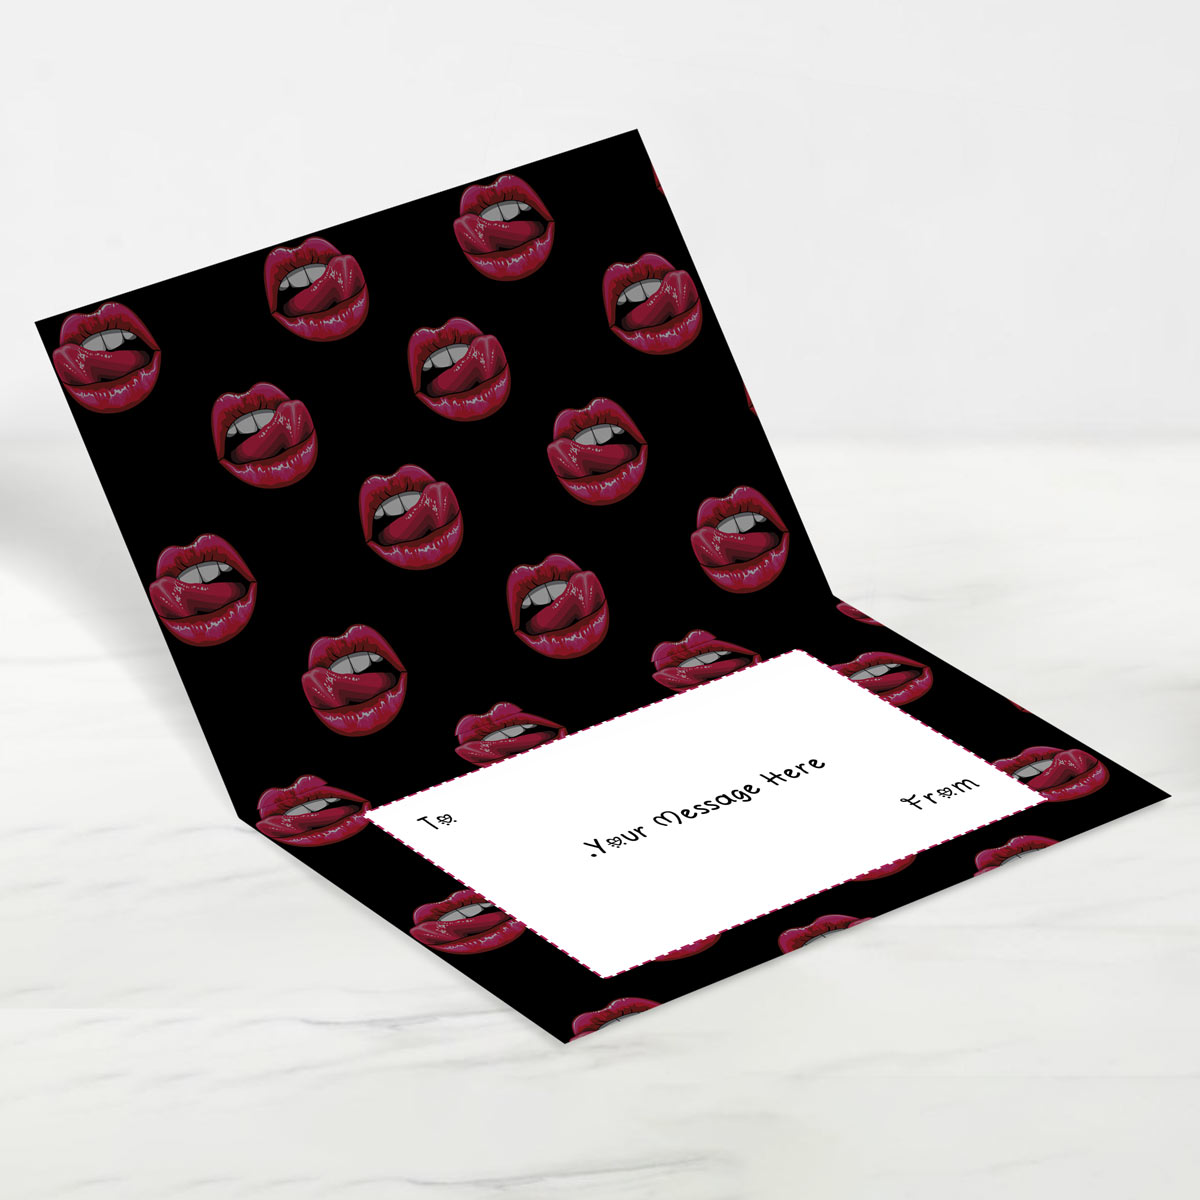 Licked It Personalised Greeting Card